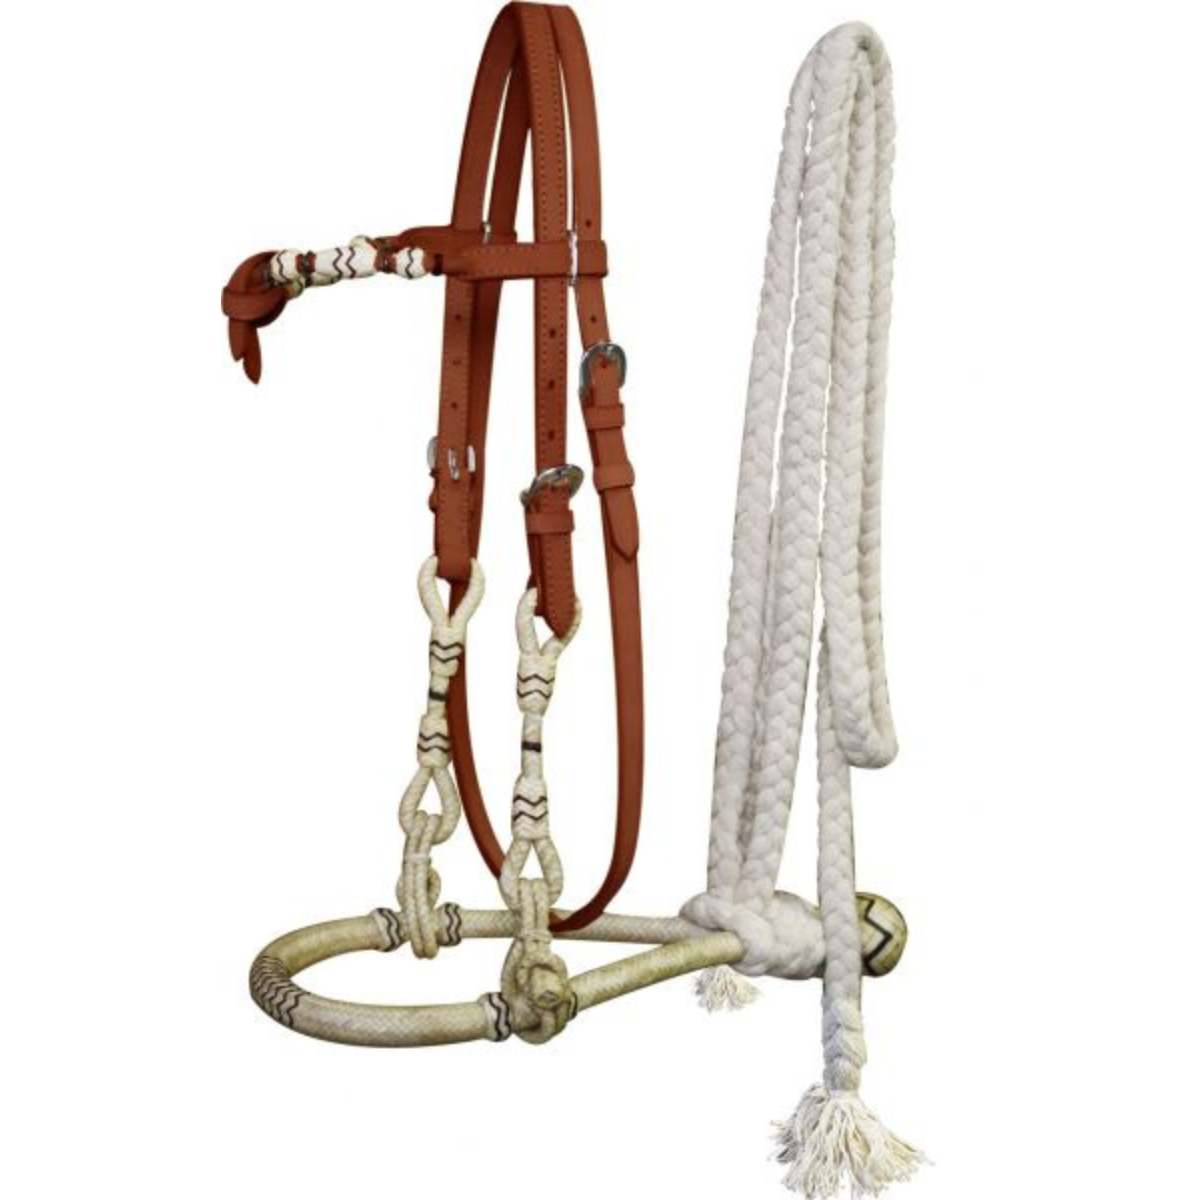 RAWHIDE CORE SHOW BOSAL WITH A COTTON MECATE REIN